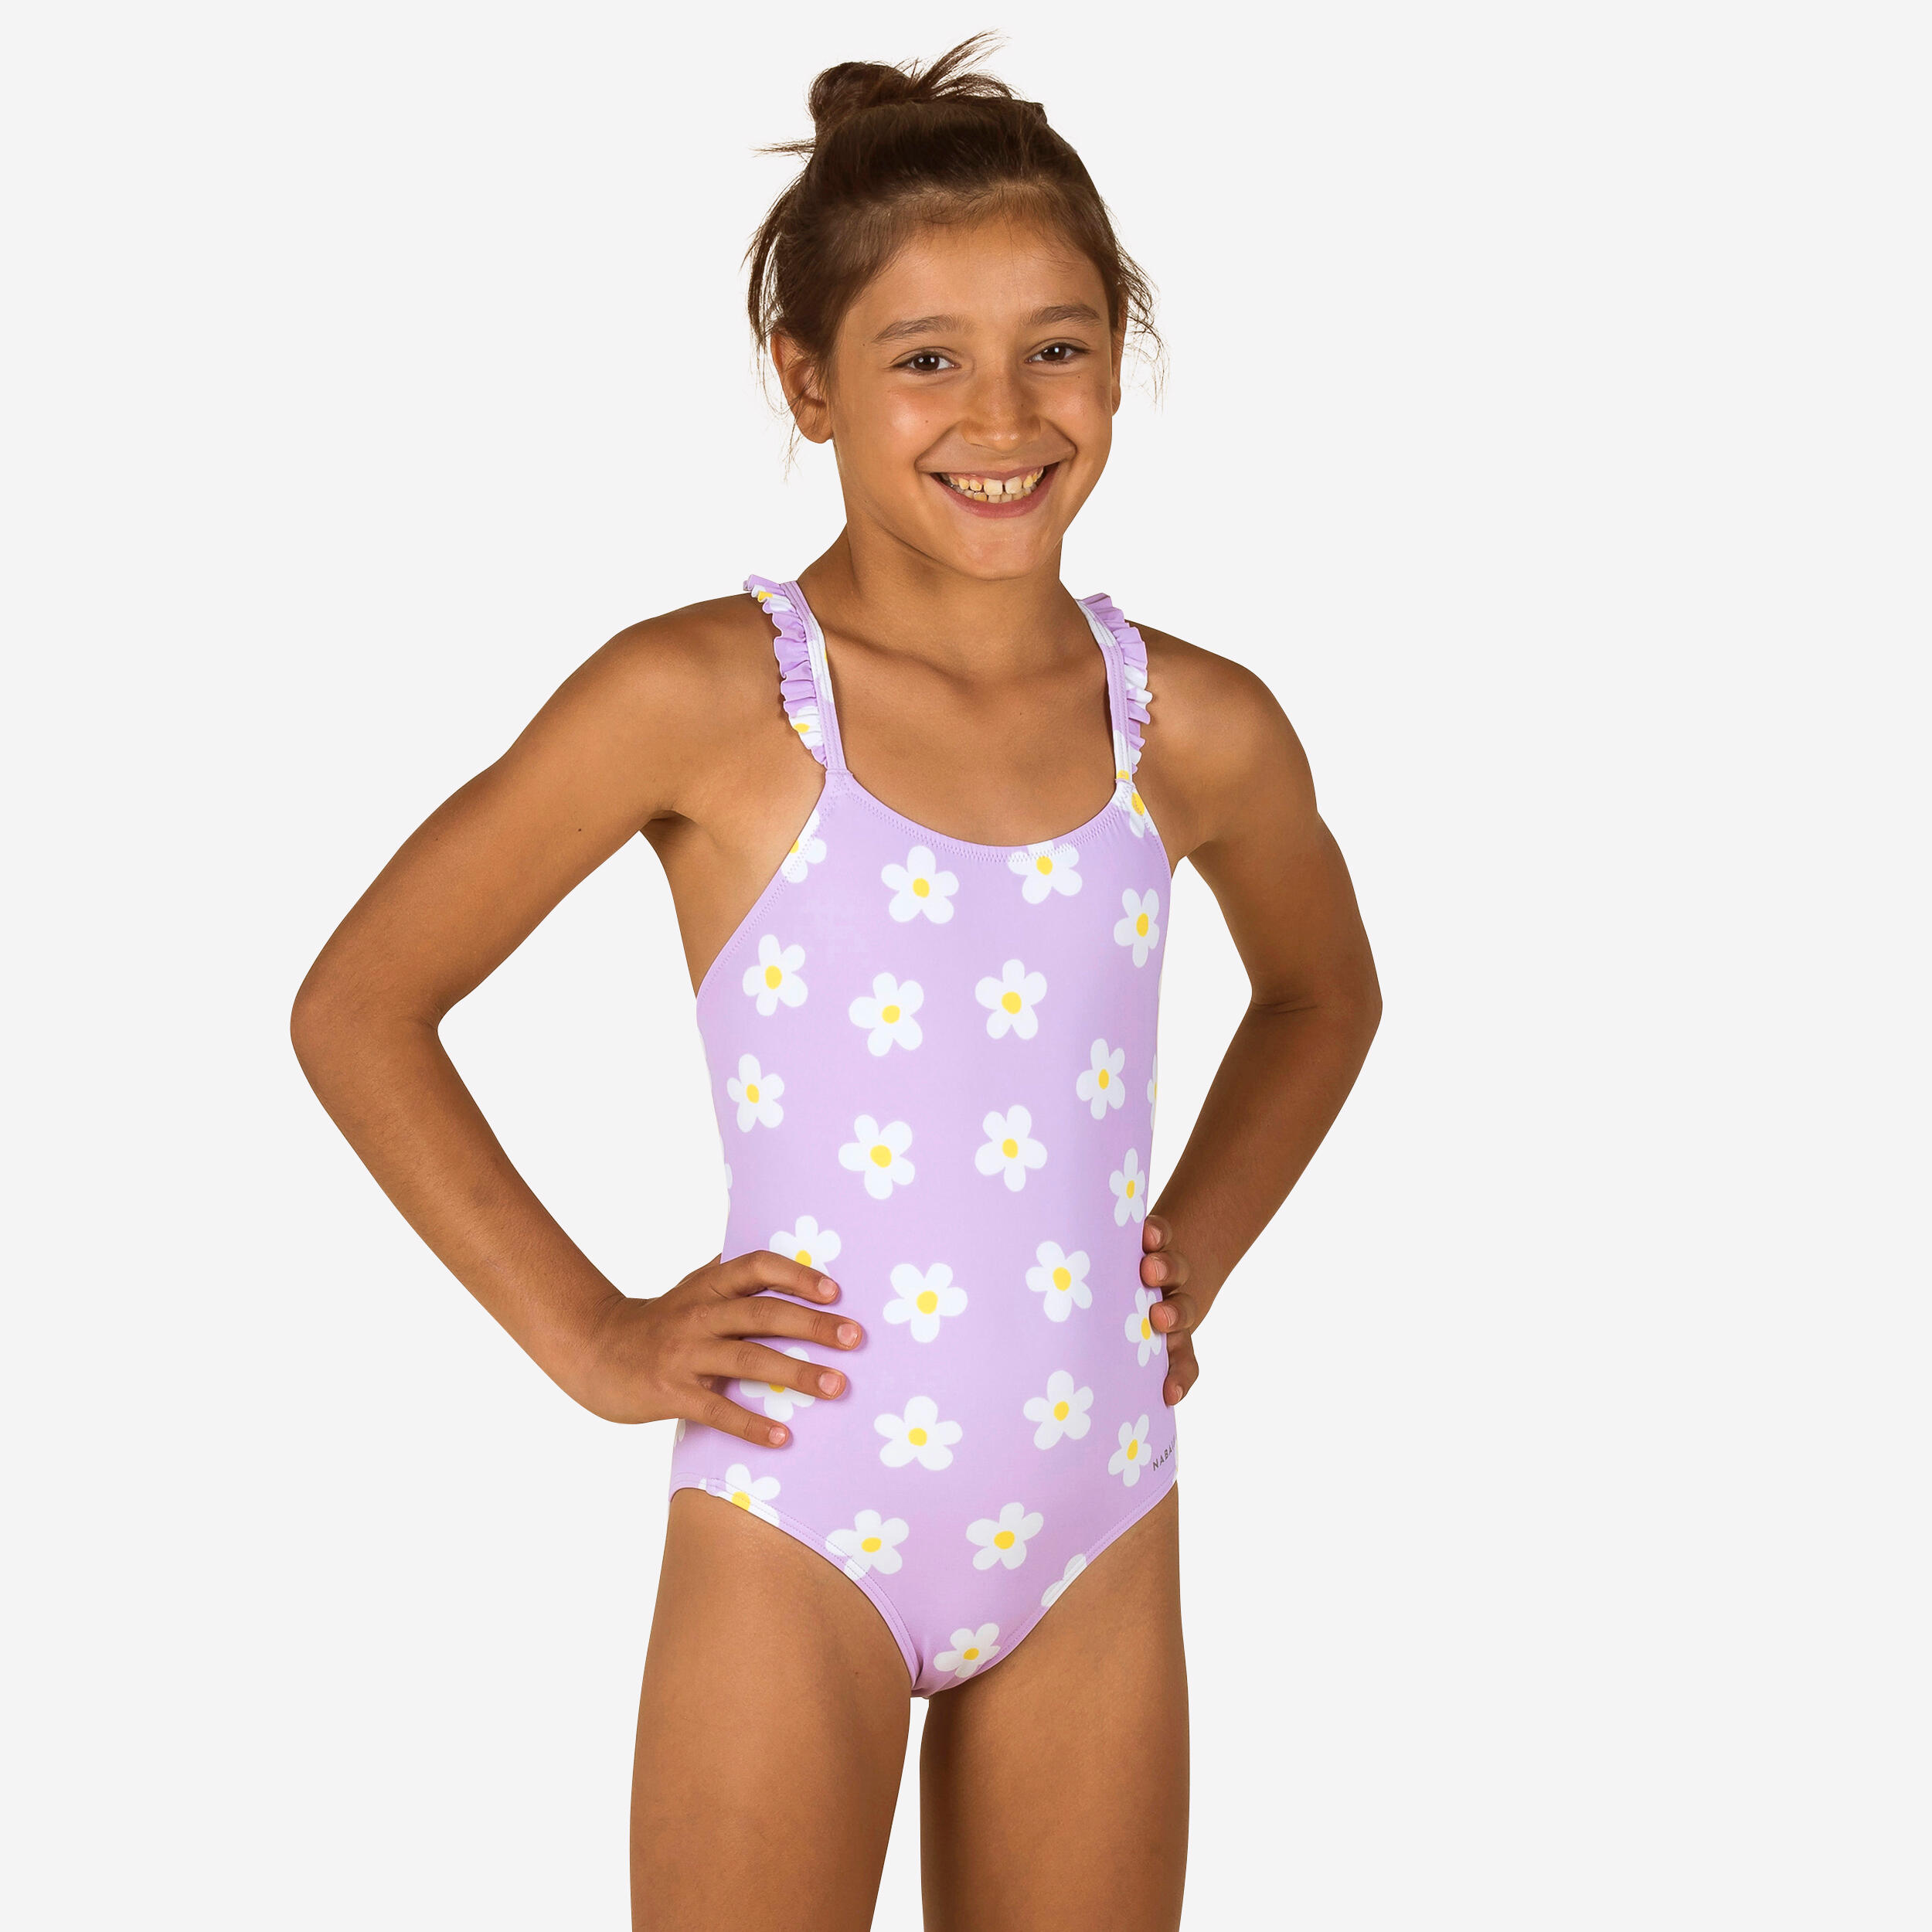 Lila 100 Girl's Swimsuit - Marg Lilac 1/4